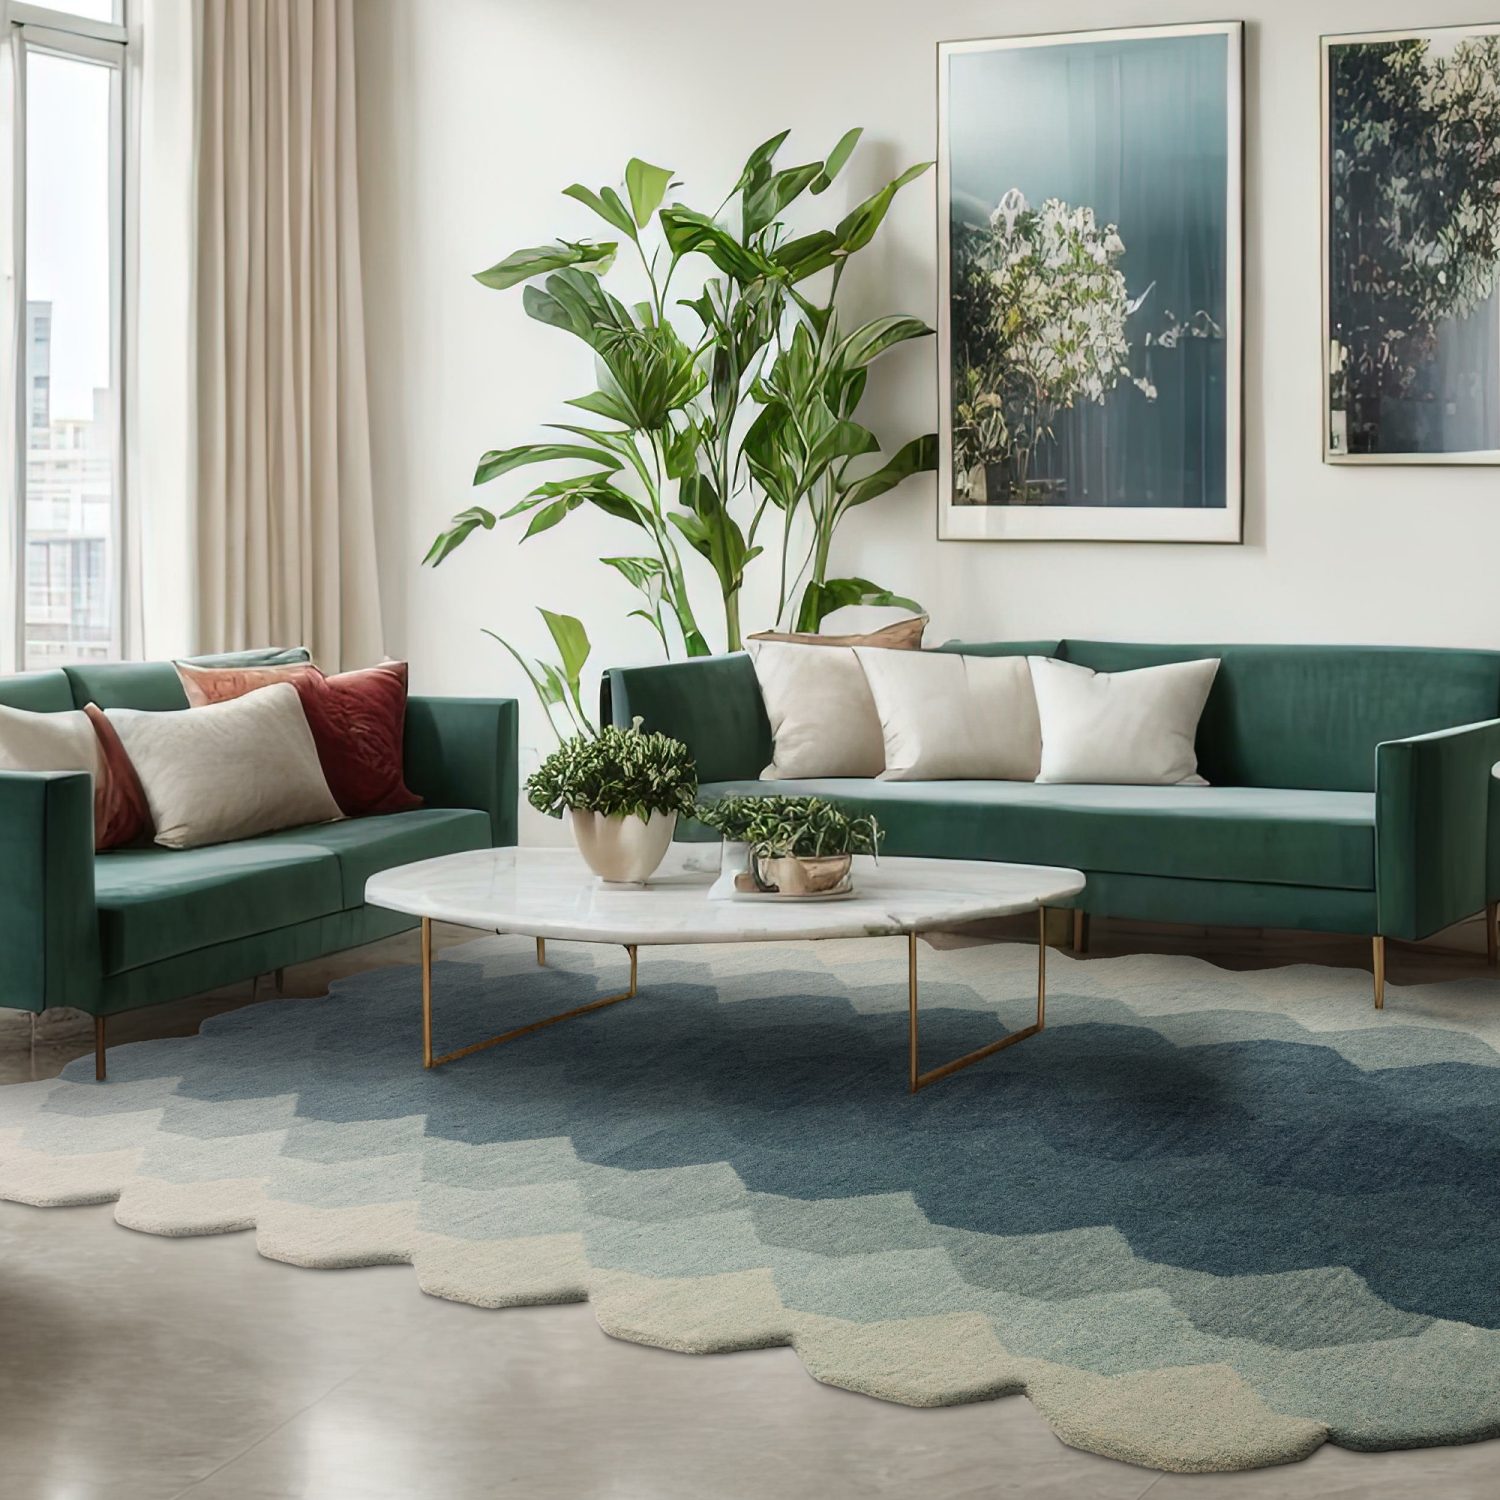 INTRODUCING THE UNIQUE RUG: ARIS IN TEAL FROM OUR FLOOR_STORY INTRODUCES COLLECTION